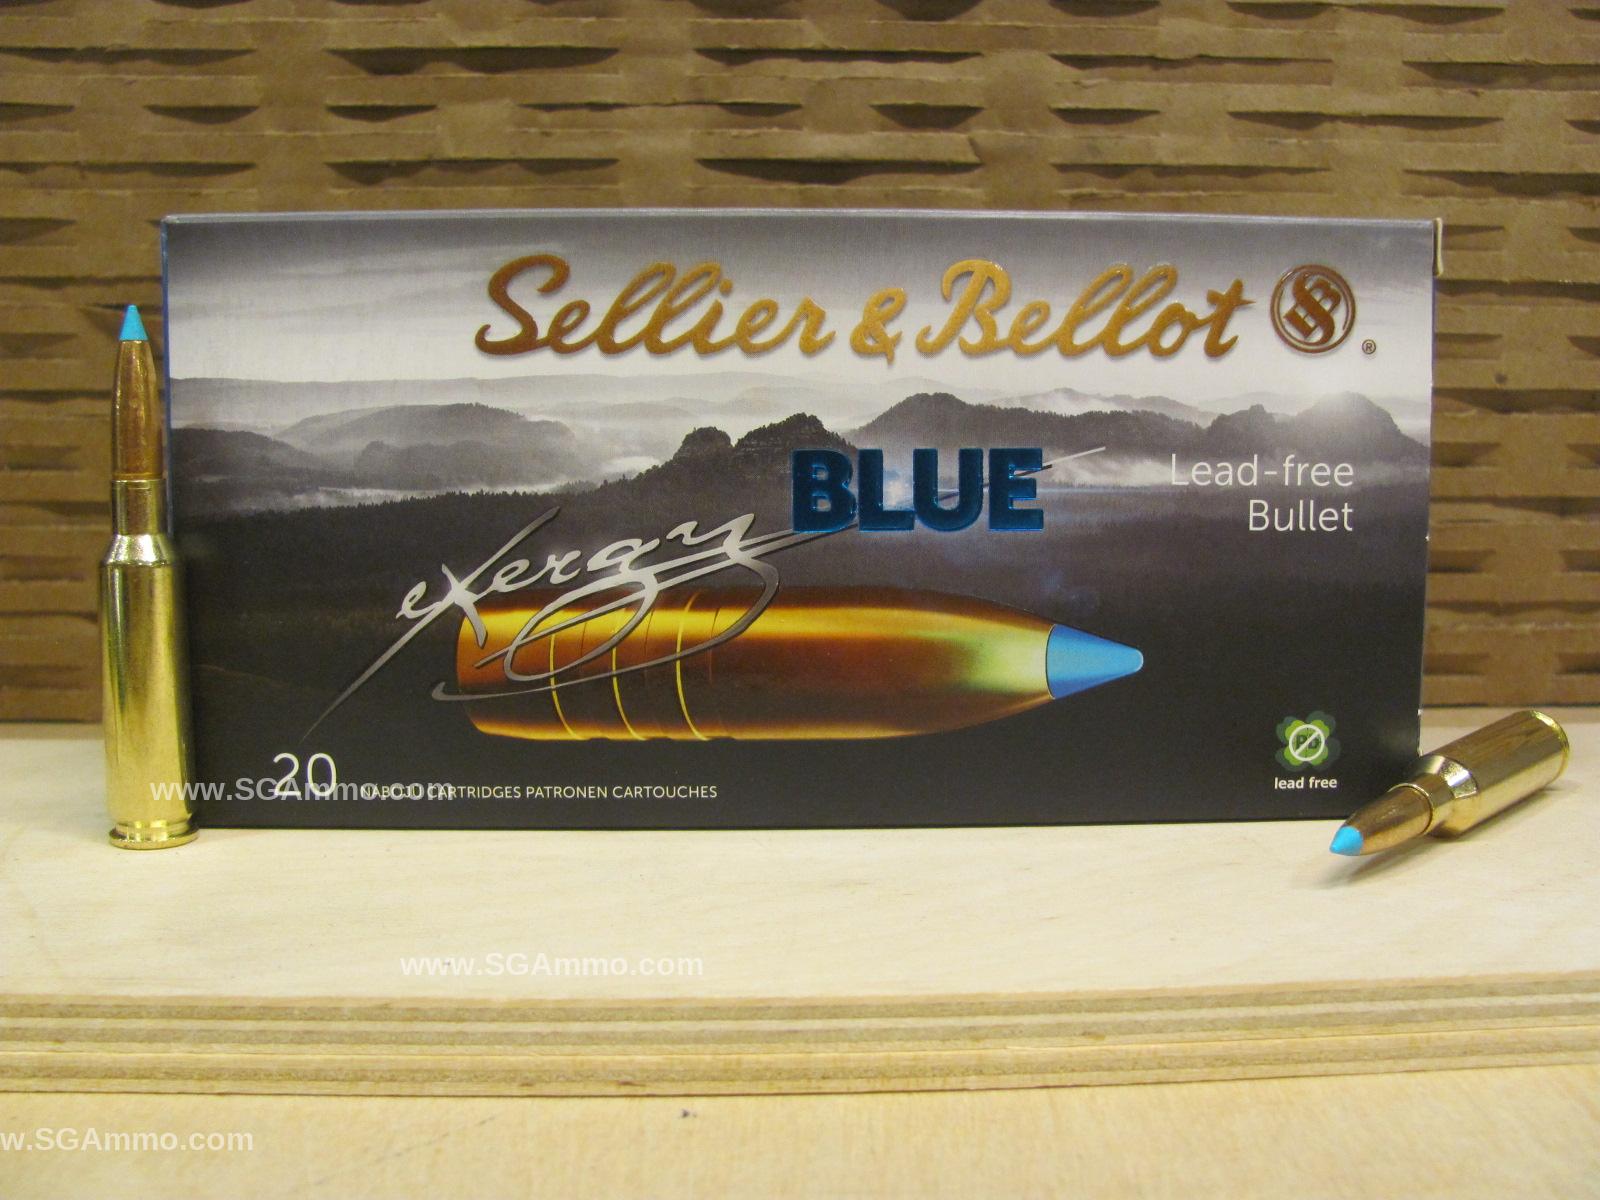 100 Round Plastic Can - 6.5 Creedmoor 120 Grain TXRG Sellier Bellot Exergy Ammo - SB65XA - Packed in Plastic Ammo Canister